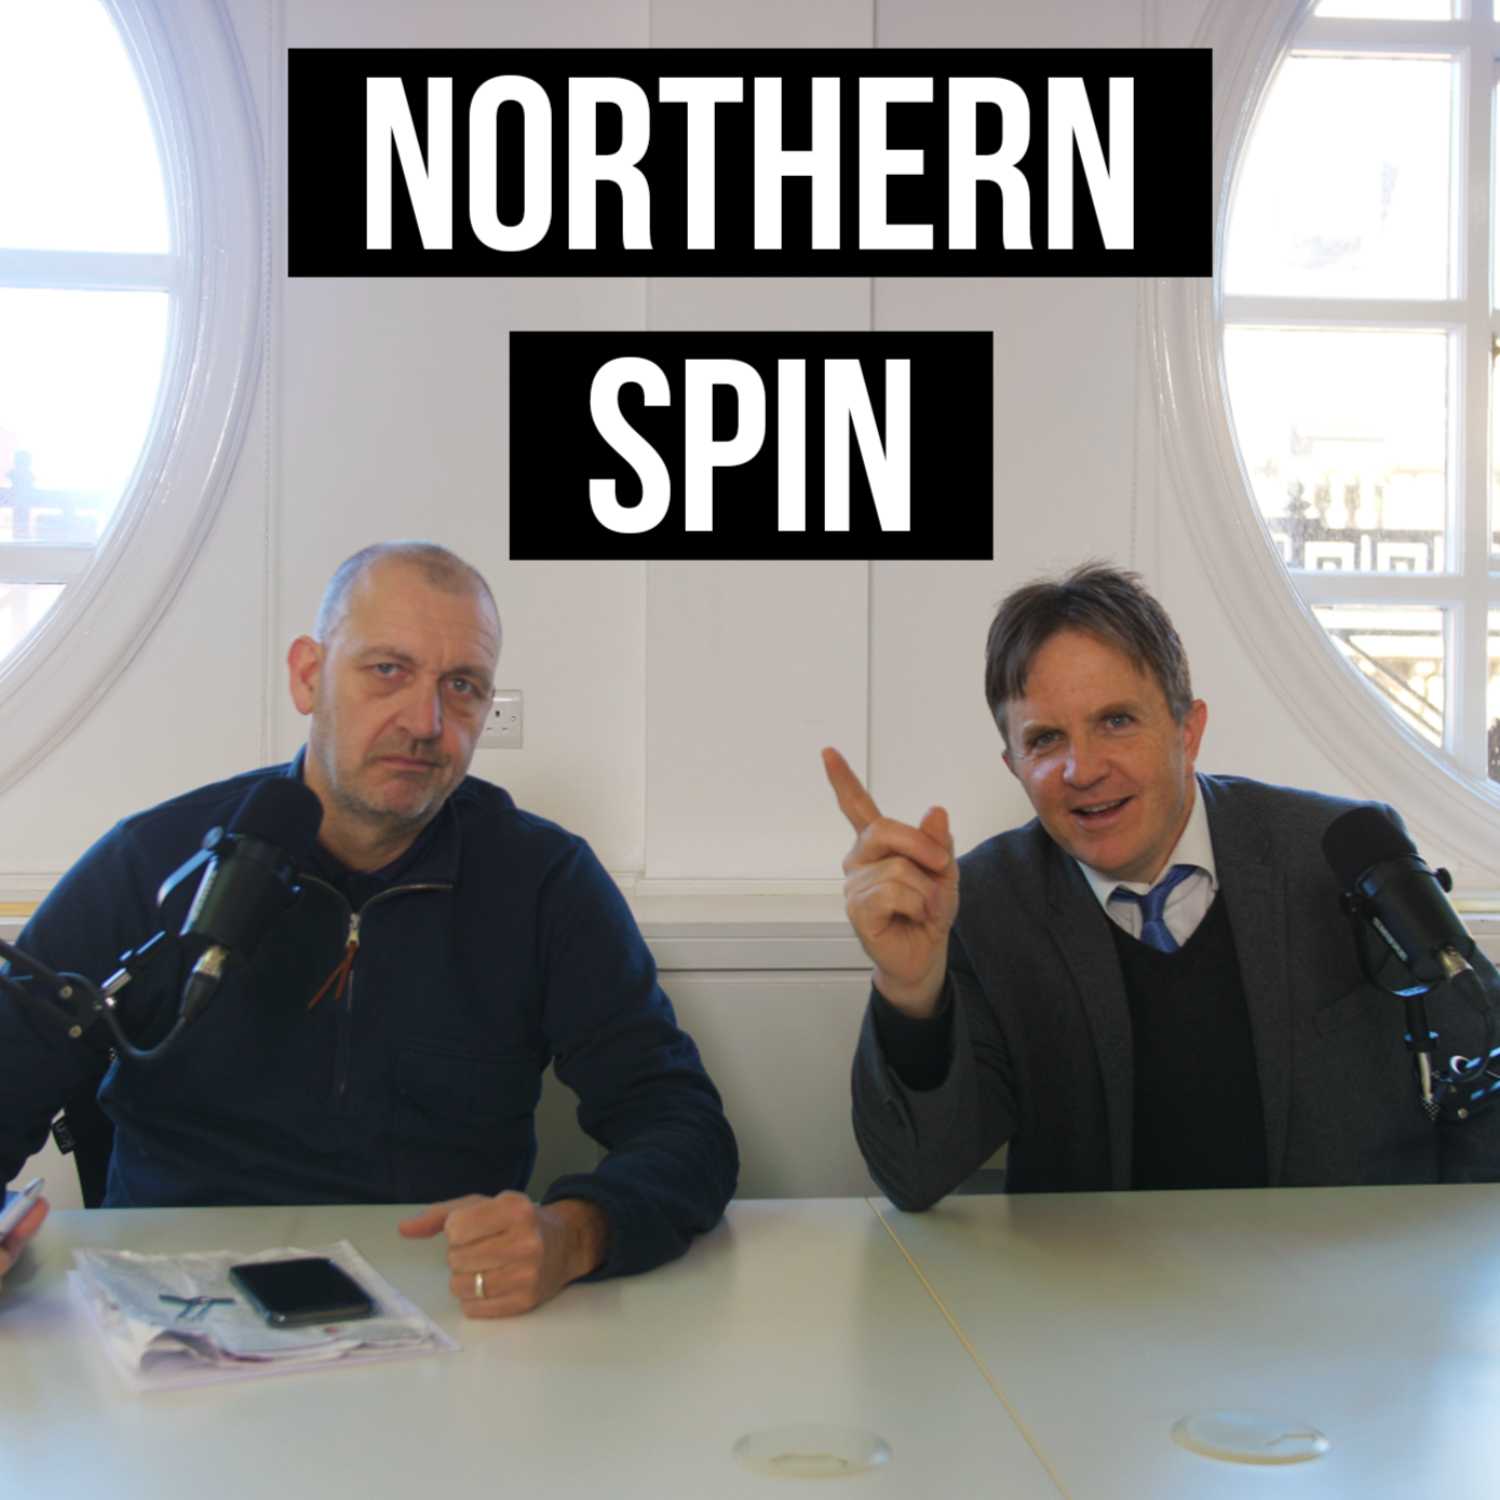 Northern Spin - Season 4 - Episode 9: Labour control freakery, Keegan's beef with Burnham and the ludicrous Mr Fox (Laurence, that is)